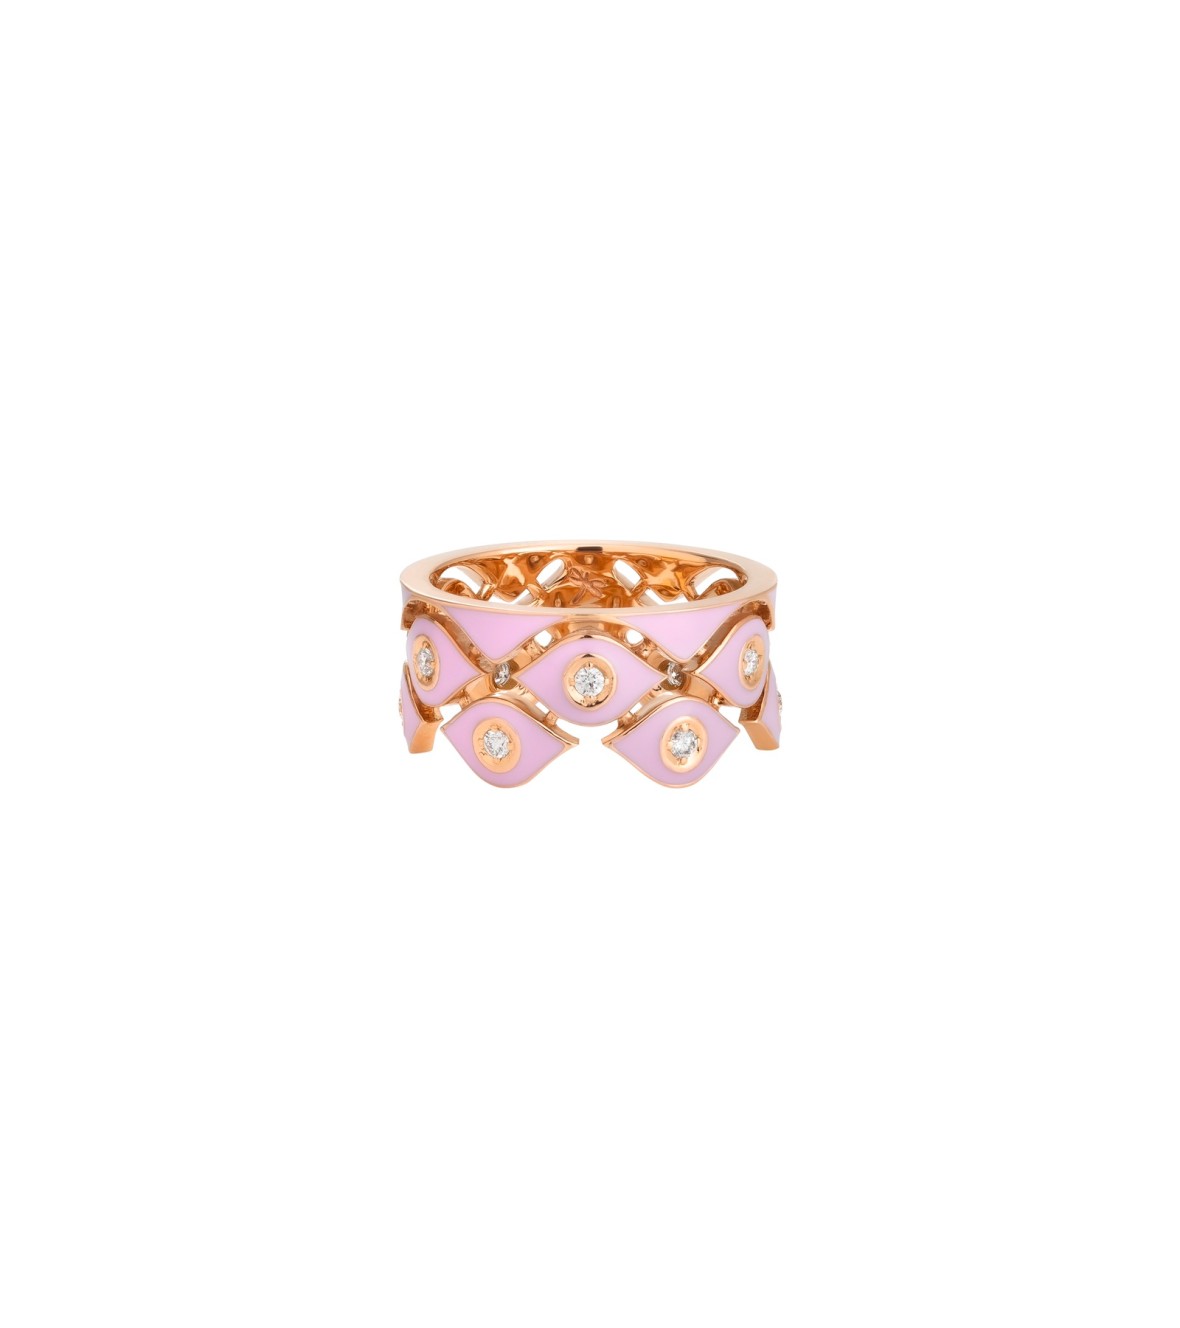 Yellow Gold Ring with Diamonds and Pink Enamel Casato MX-1529BT-Y